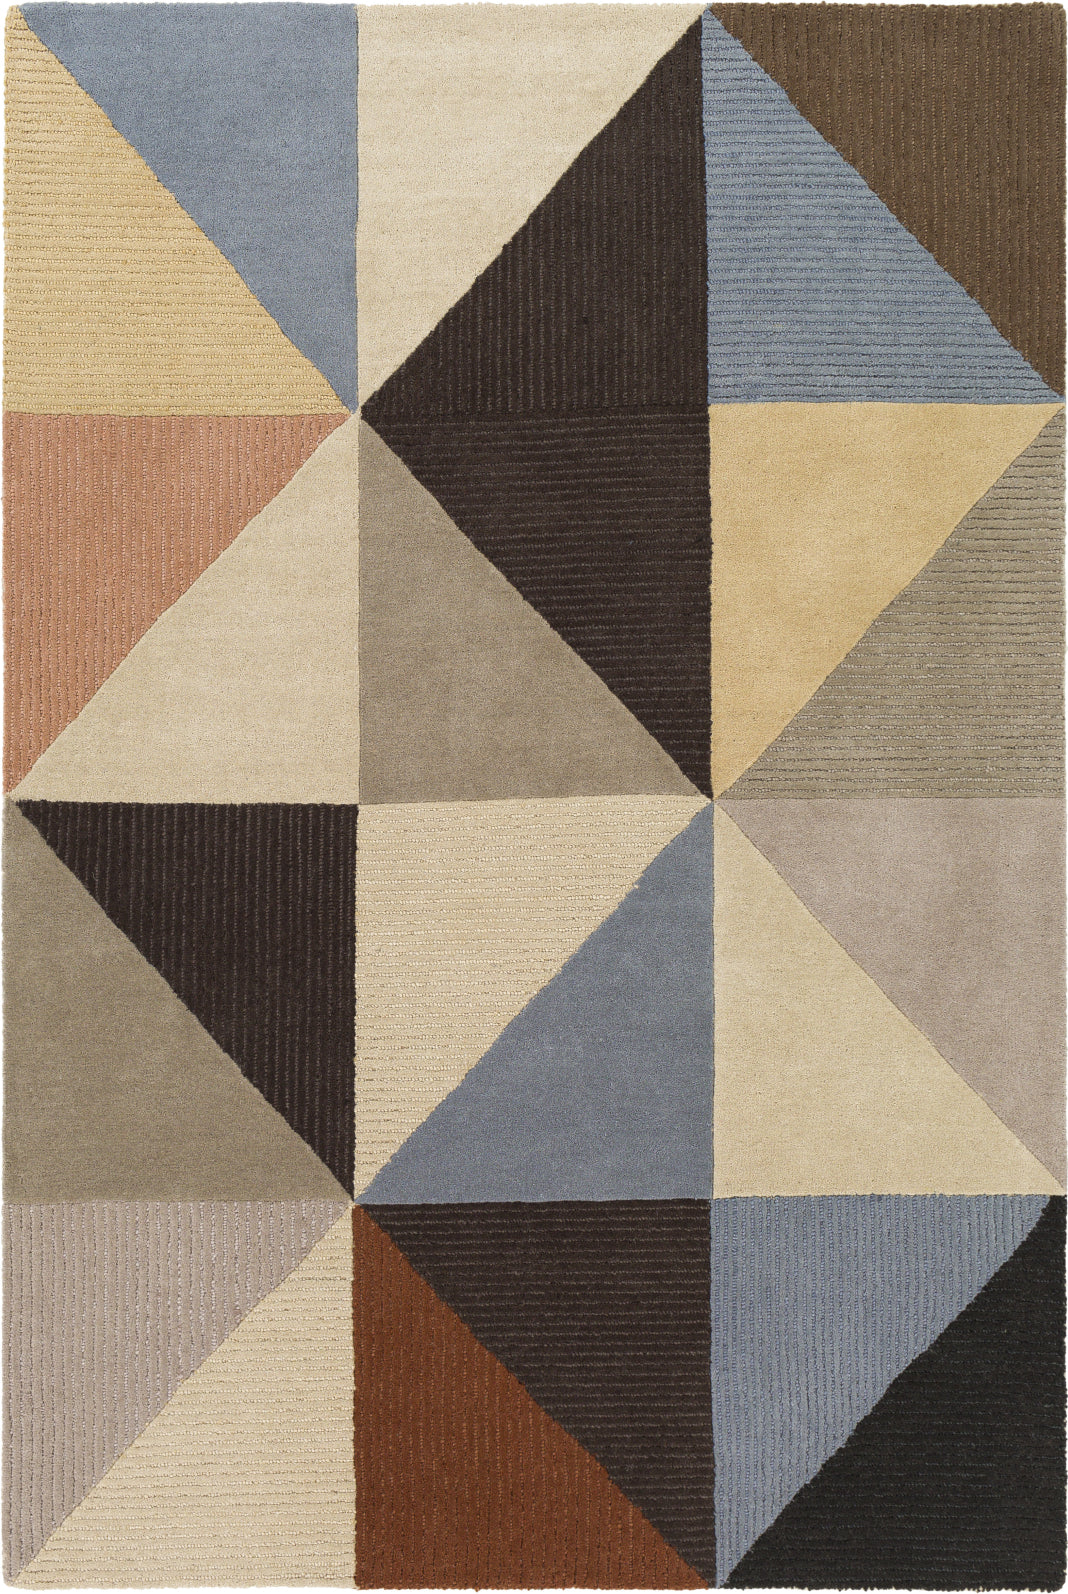 Surya Kennedy KDY-3030 Area Rug Main Image Featured